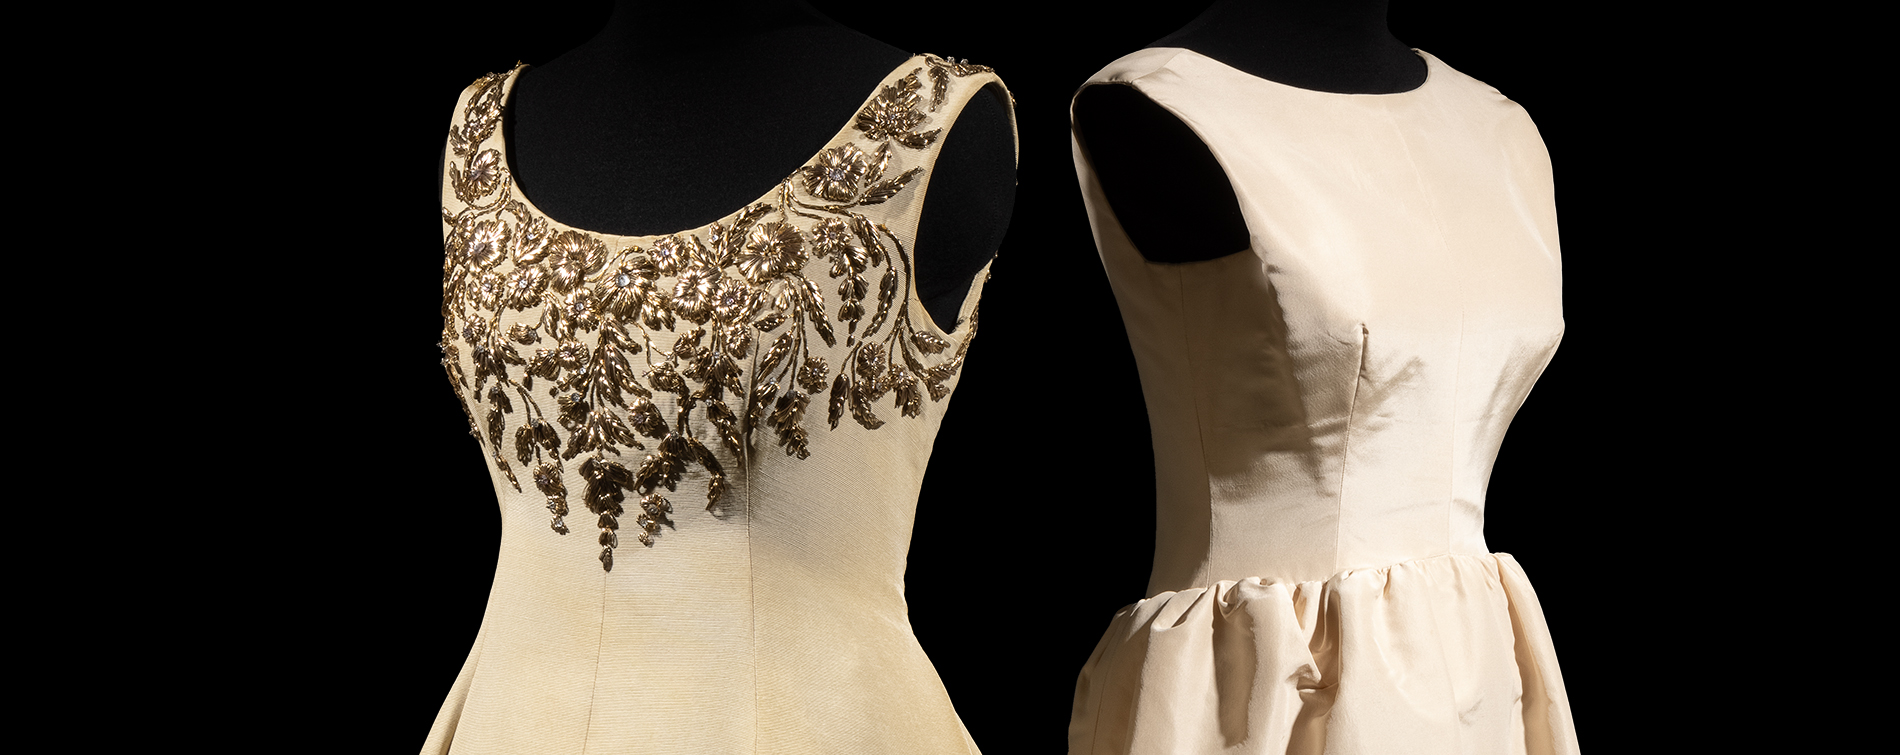 bodice view of two cream-colored dresses side-by-side